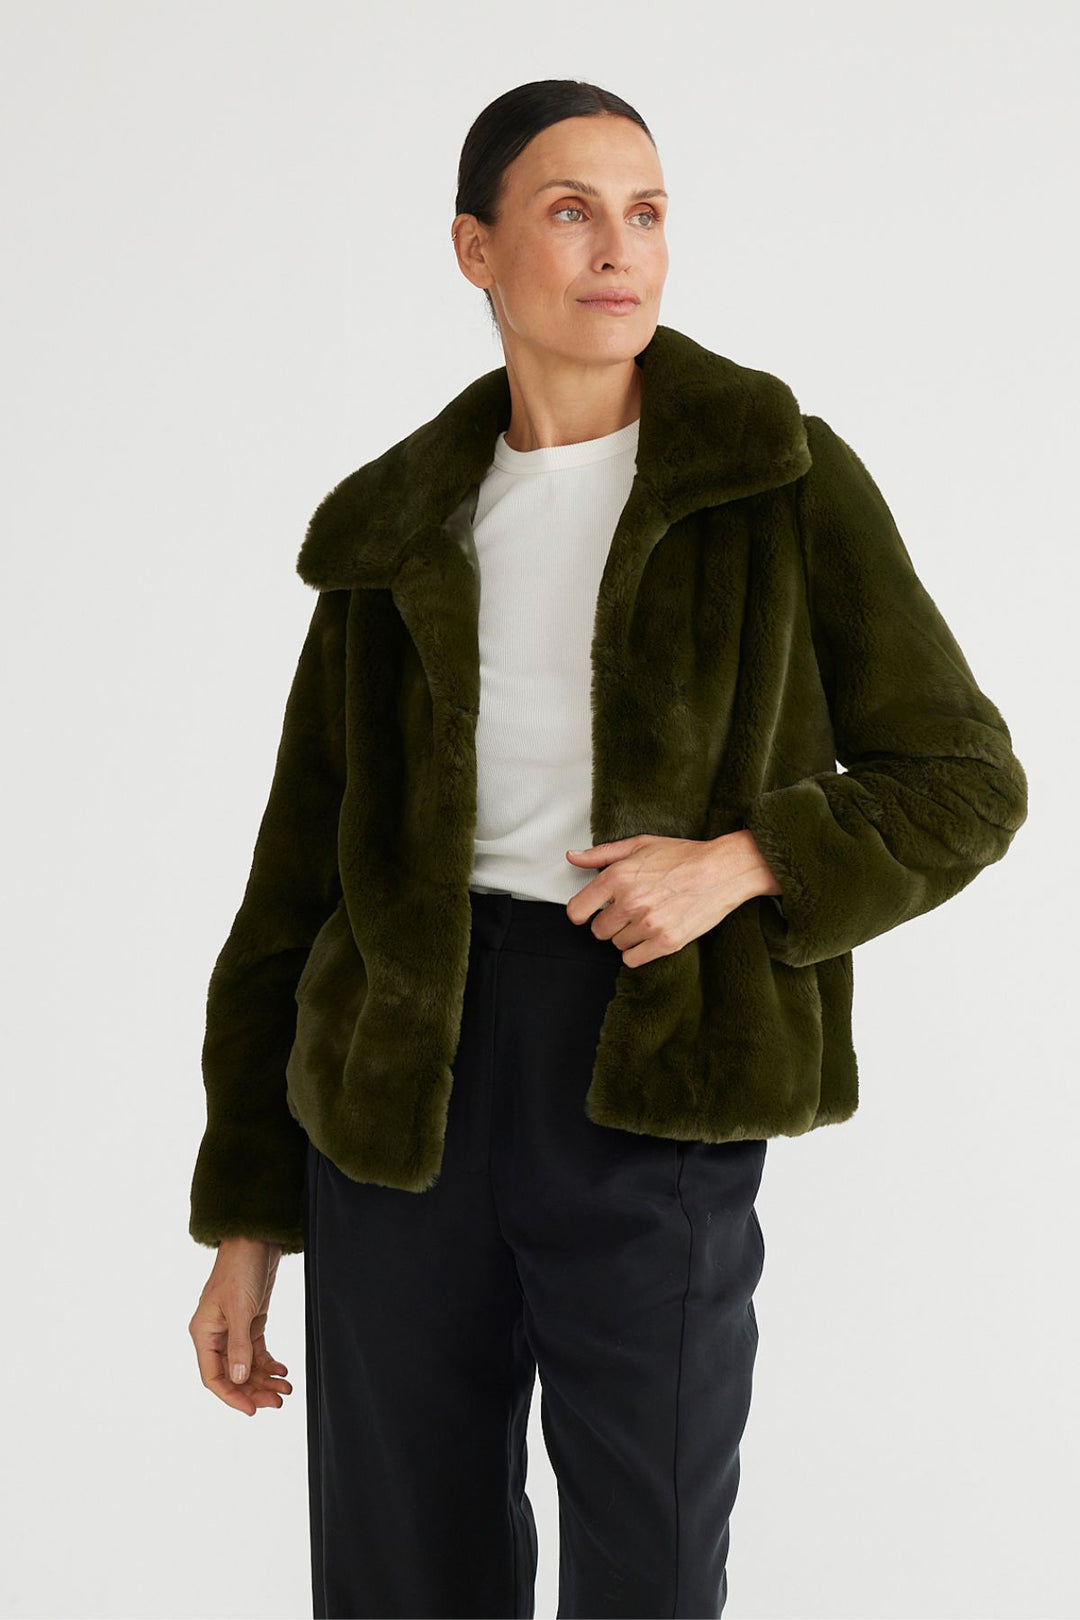 Transport to a wonderland of warmth in the Steinway Jacket by Brave & True, featuring a clip metal closure, an oversized collar, this jacket will keep you cozy and on trend all season.   Brand Brave & True  Style BT6765-3 Colour Forest Green  100% Polyester Hip Length collared Jacket Faux Fur Fully Lined  Side Pockets 